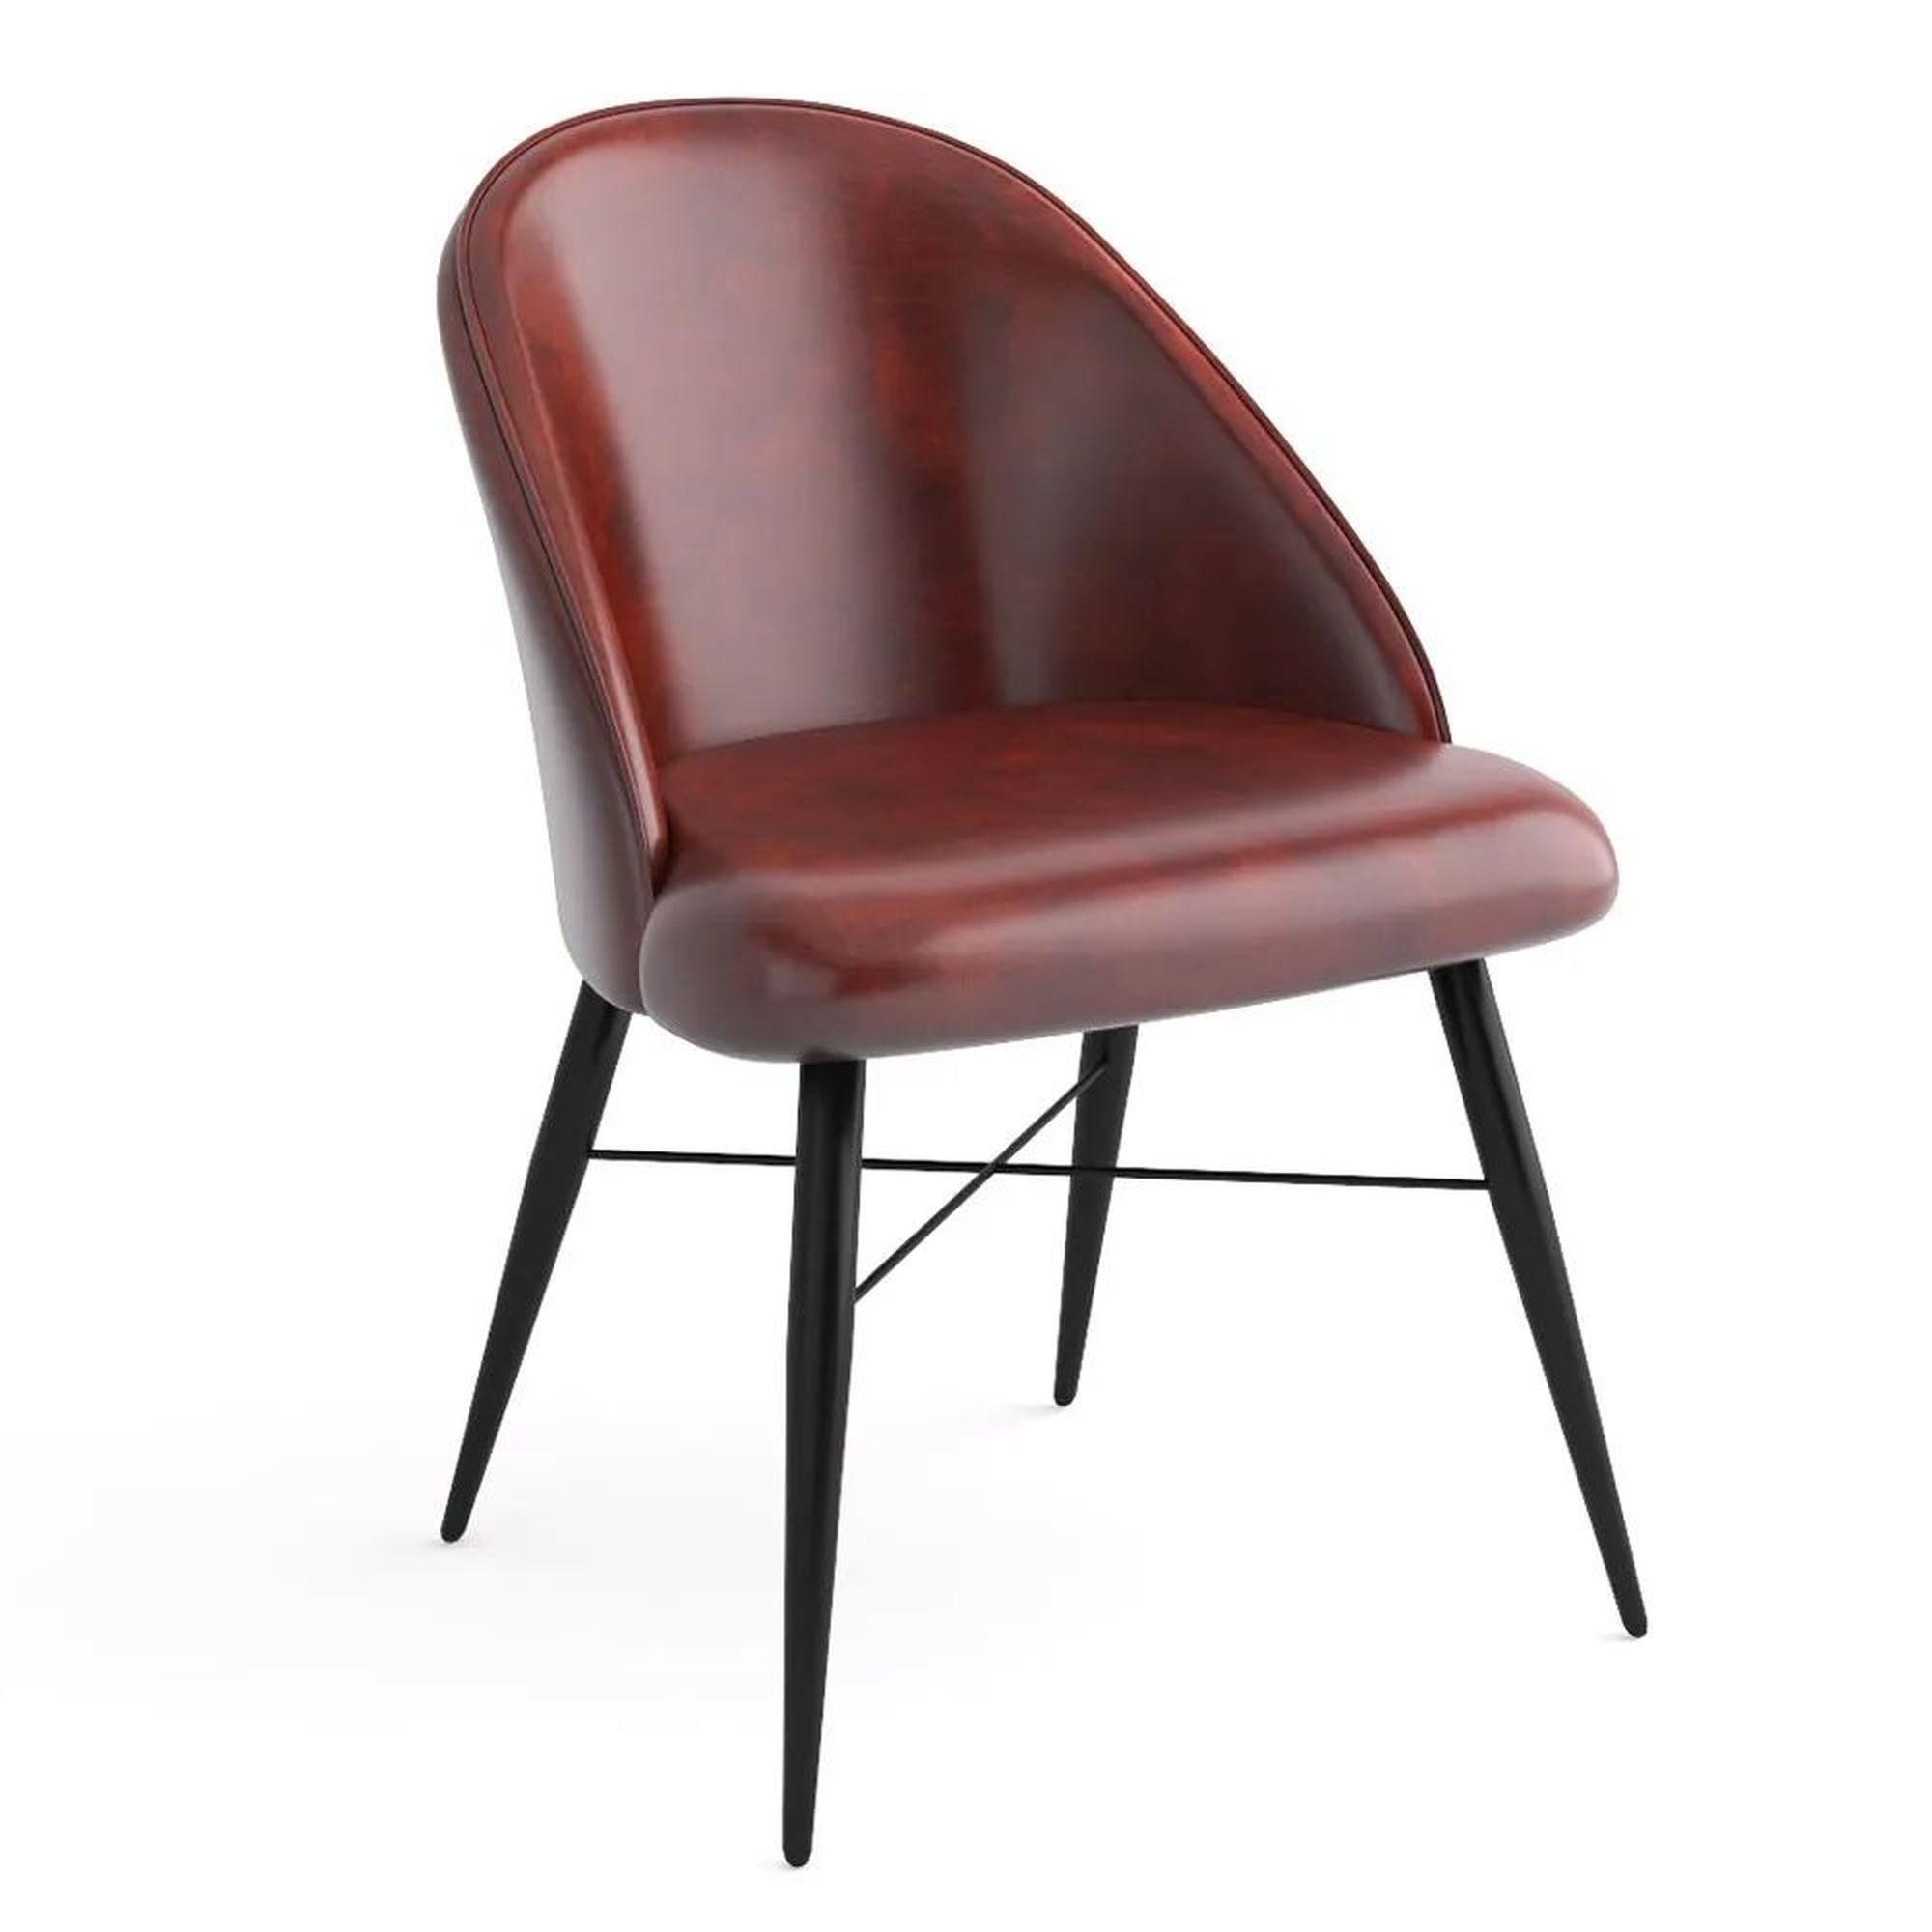 Bobby Chestnut Real Leather Dining Chair with Black Legs (Sold in Pairs)